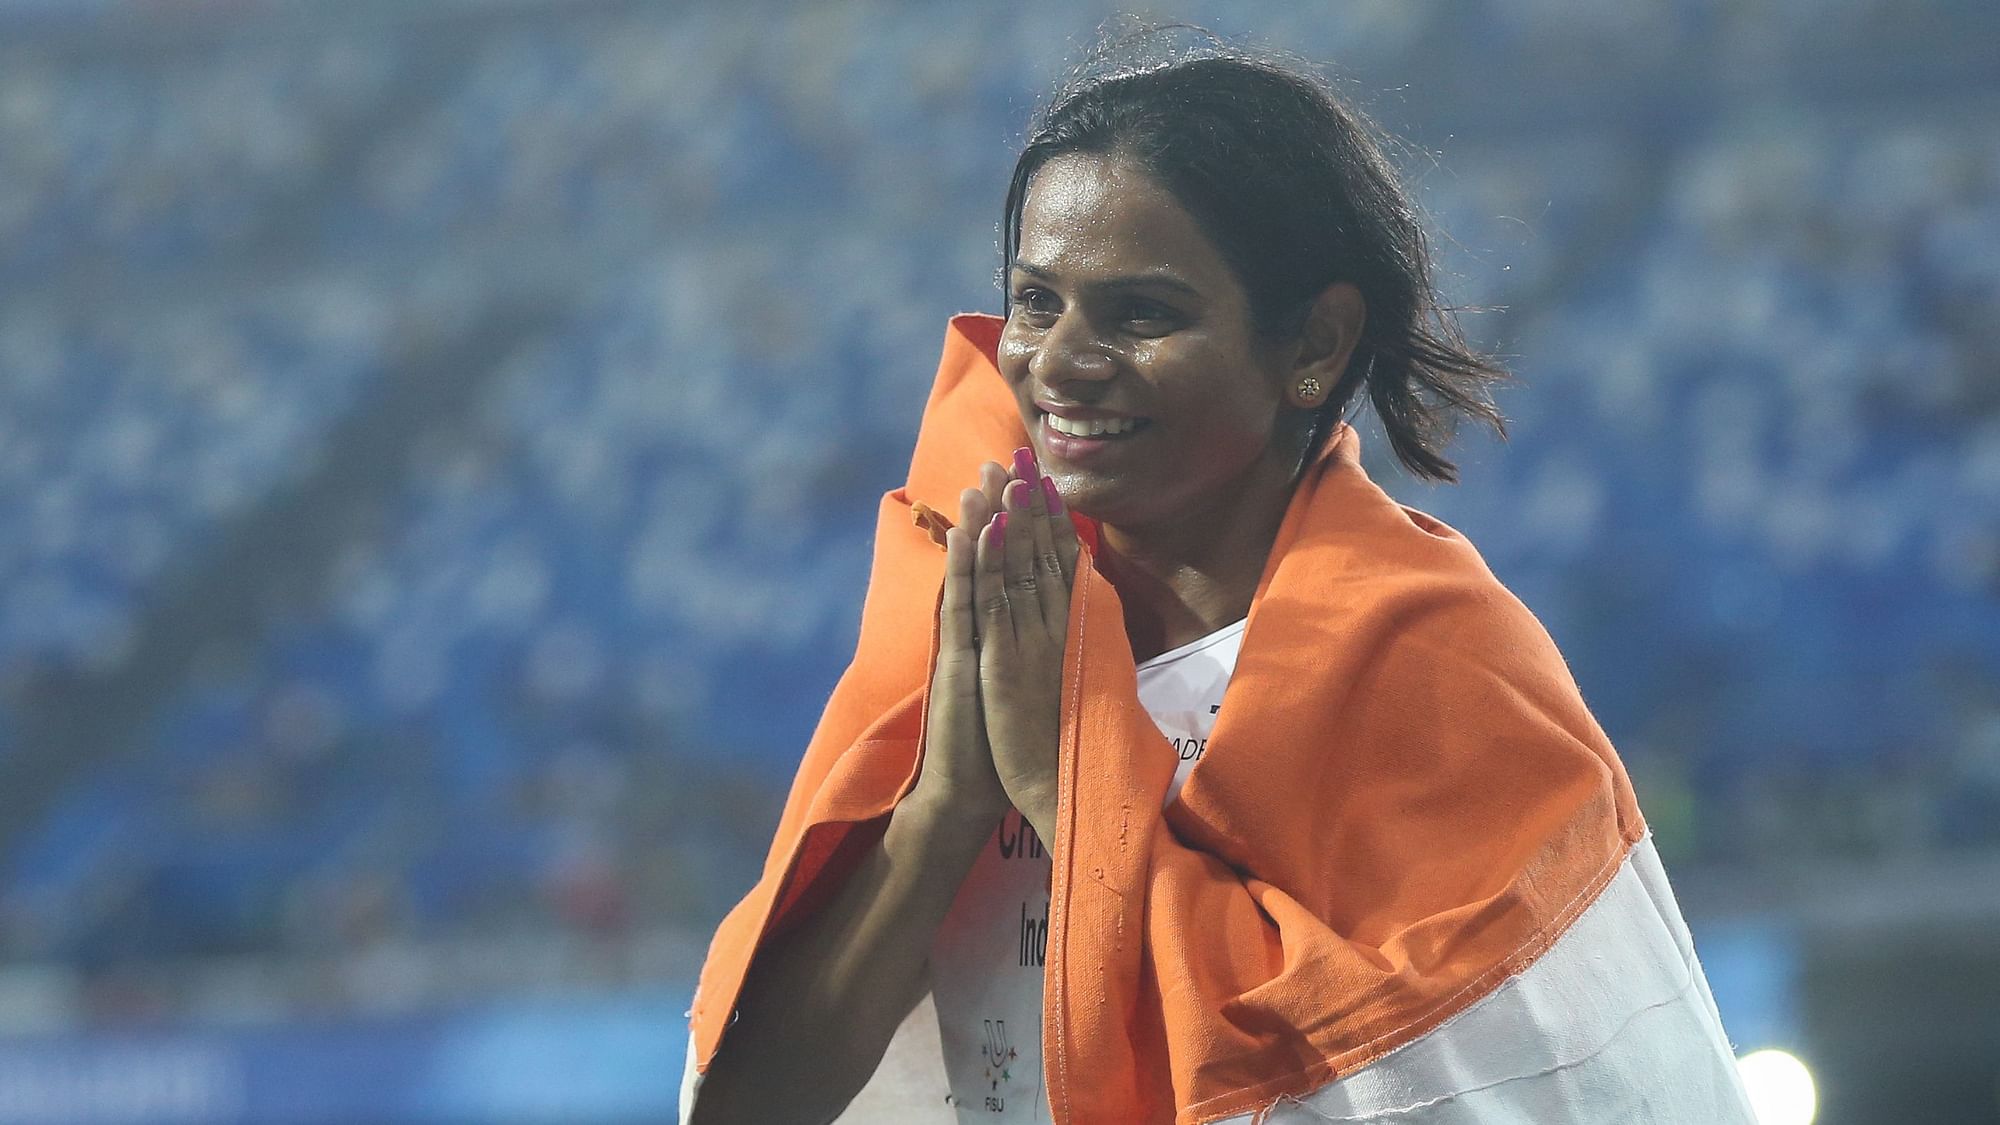 Indian sprinter Dutee Chand expressed regret for not being able to travel to Germany to participate in a couple of races.